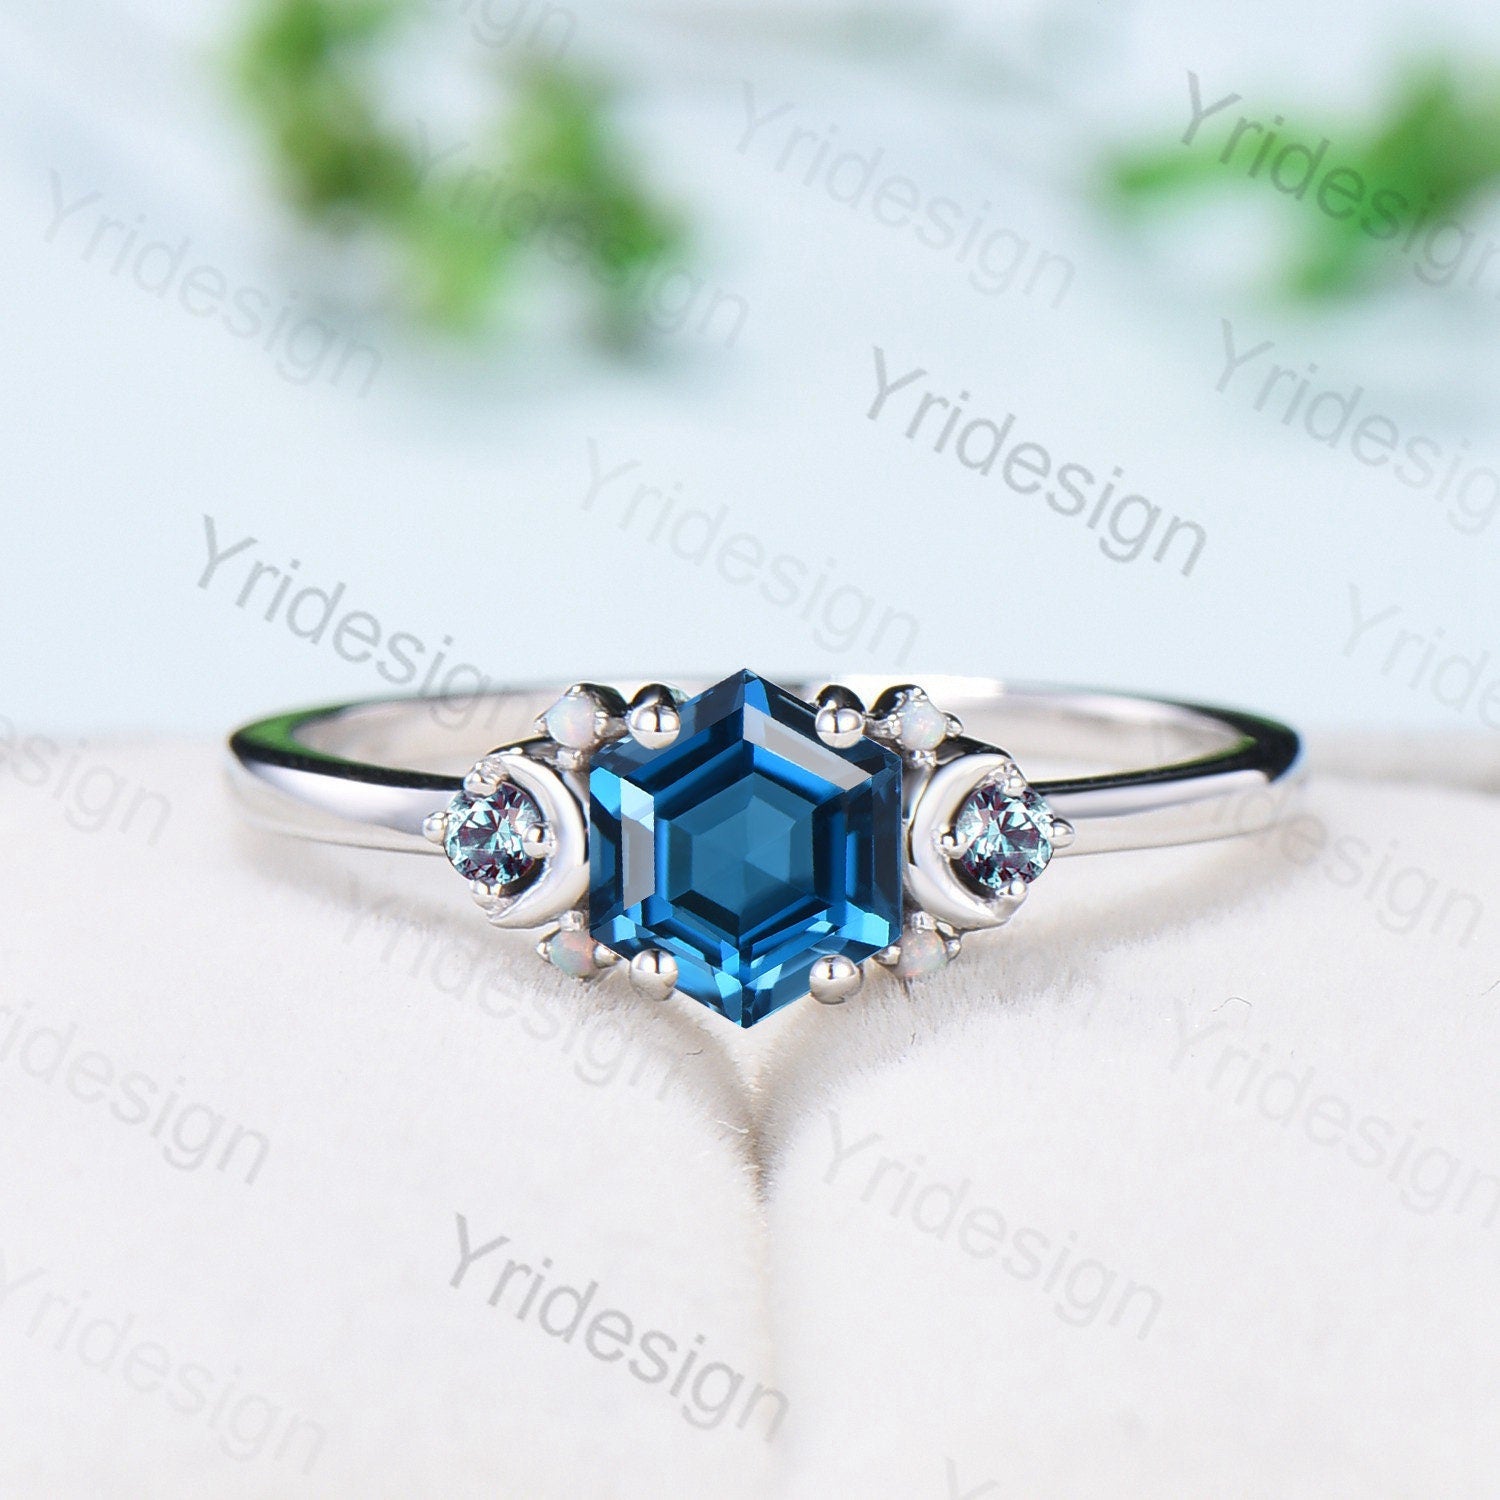 Vintage Moon London Blue Topaz Ring Unique Nature Inspired  Hexagon topaz Engagement Ring Cluster Alexandrite Opal Wedding Ring gift for her - PENFINE